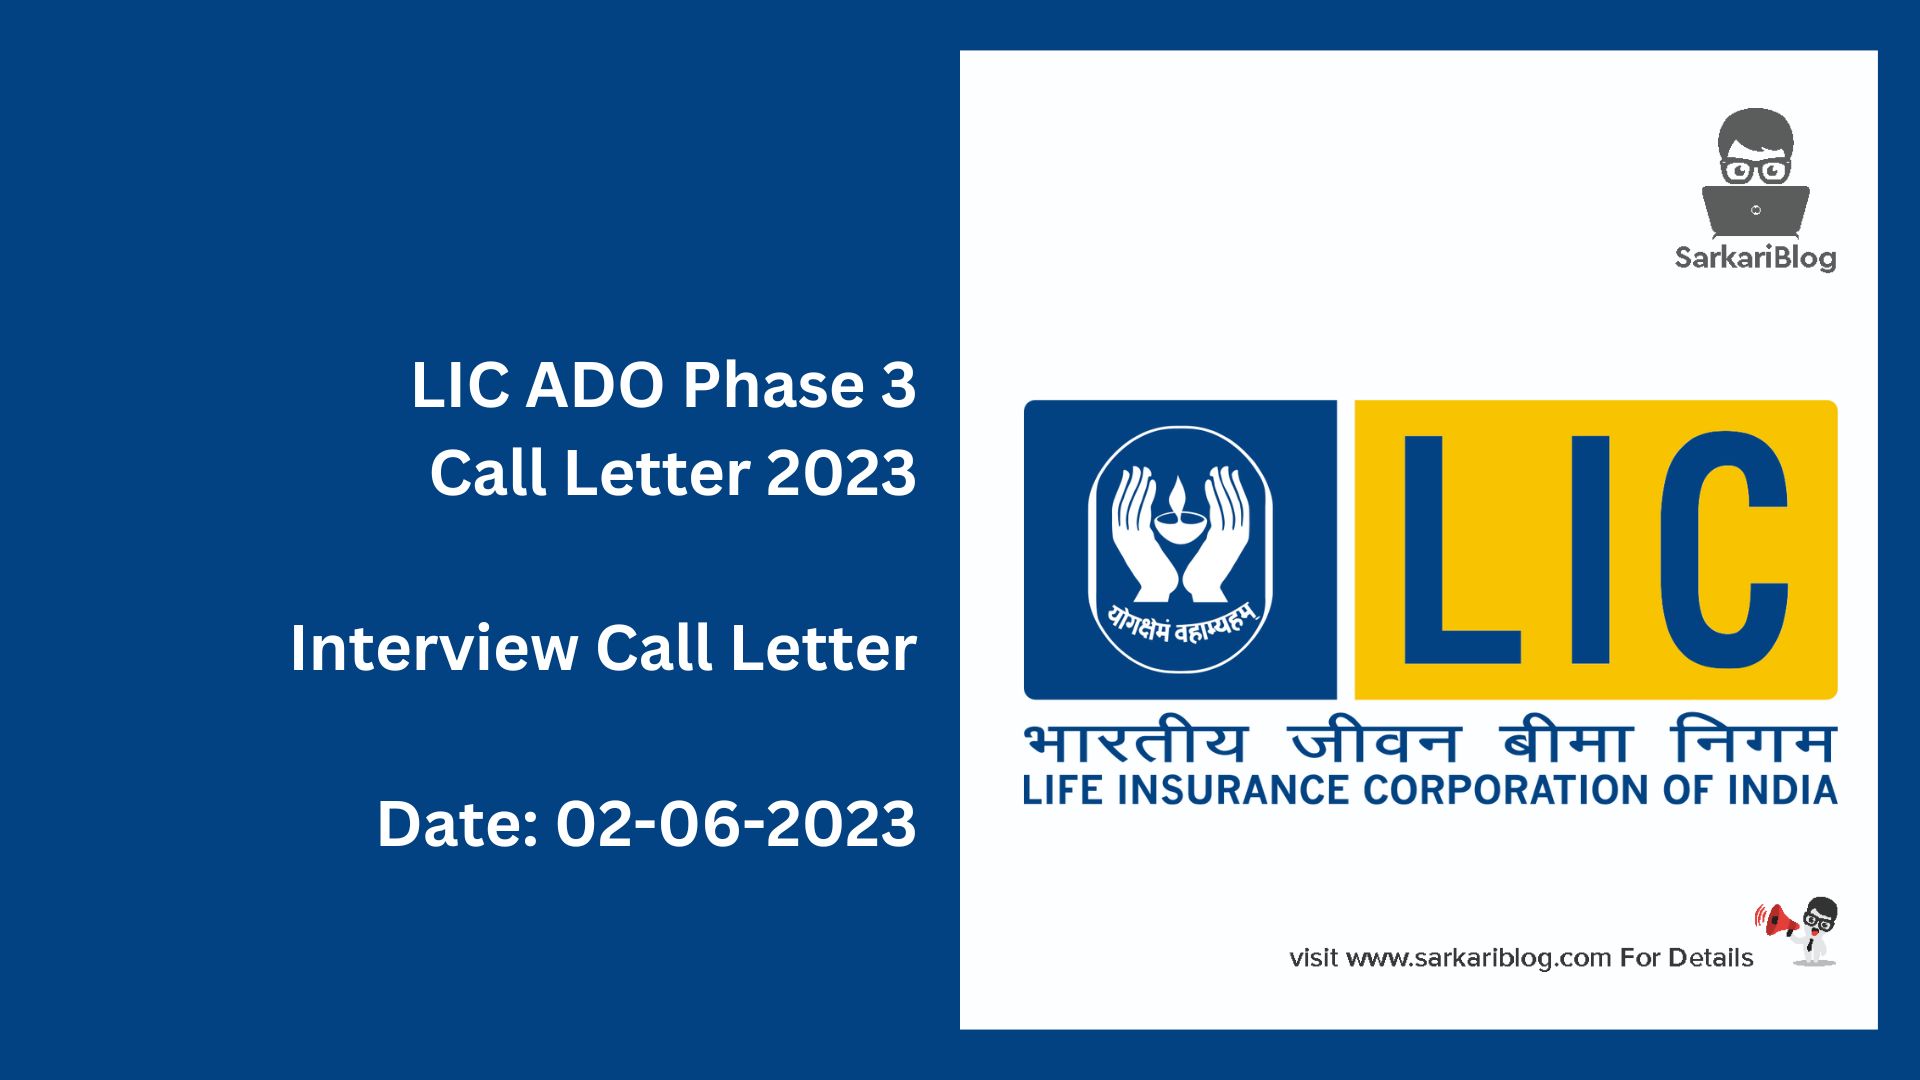 LIC ADO Phase 3 Call Letter 2023